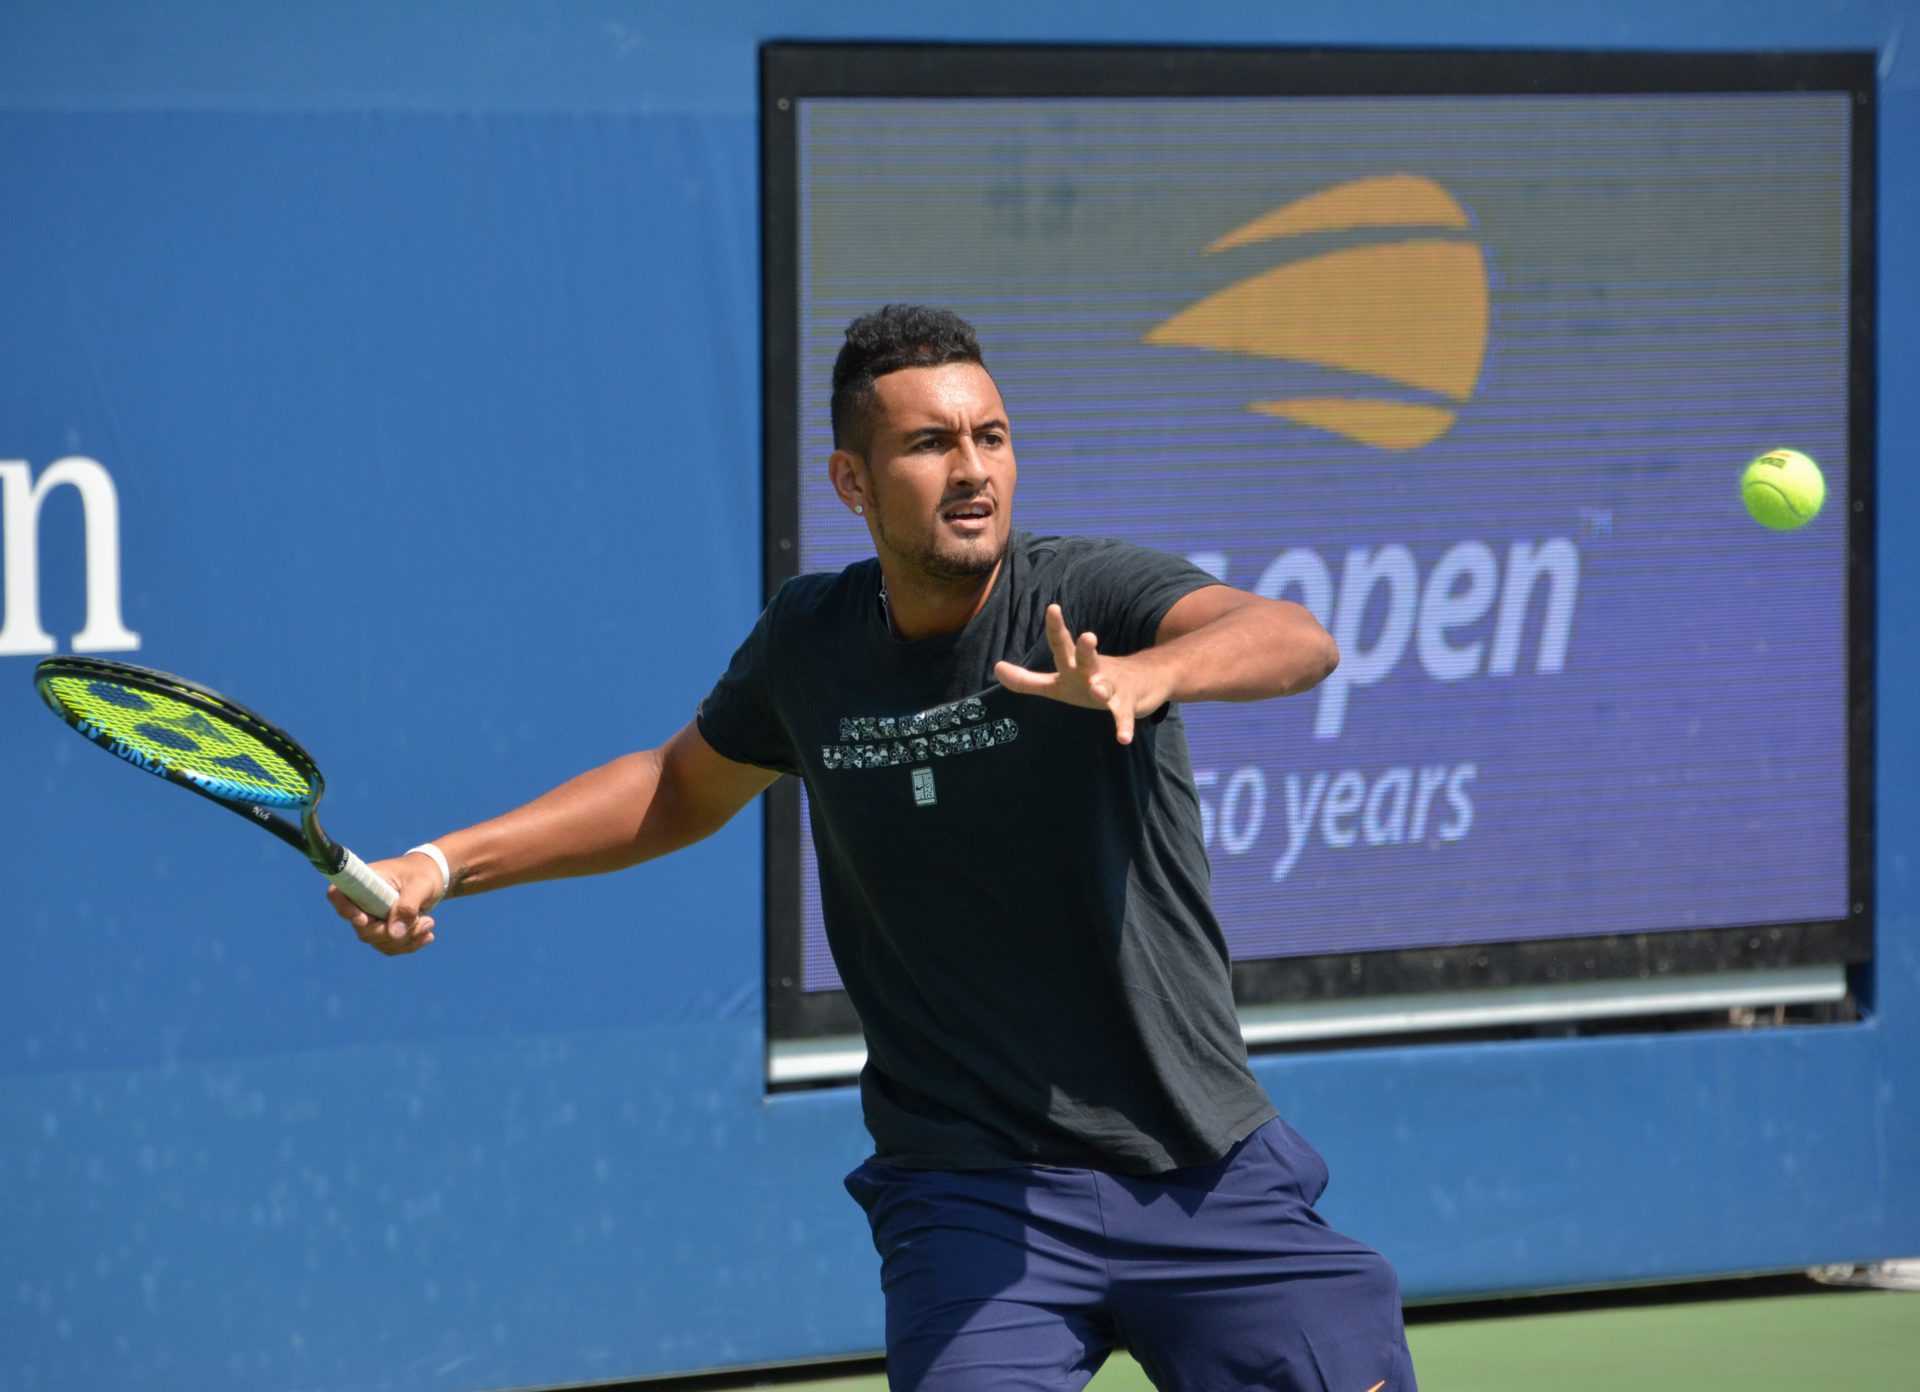 “Don’t Think the Tournament is Taking it Seriously”: Nick Kyrgios Slams French Open 2020